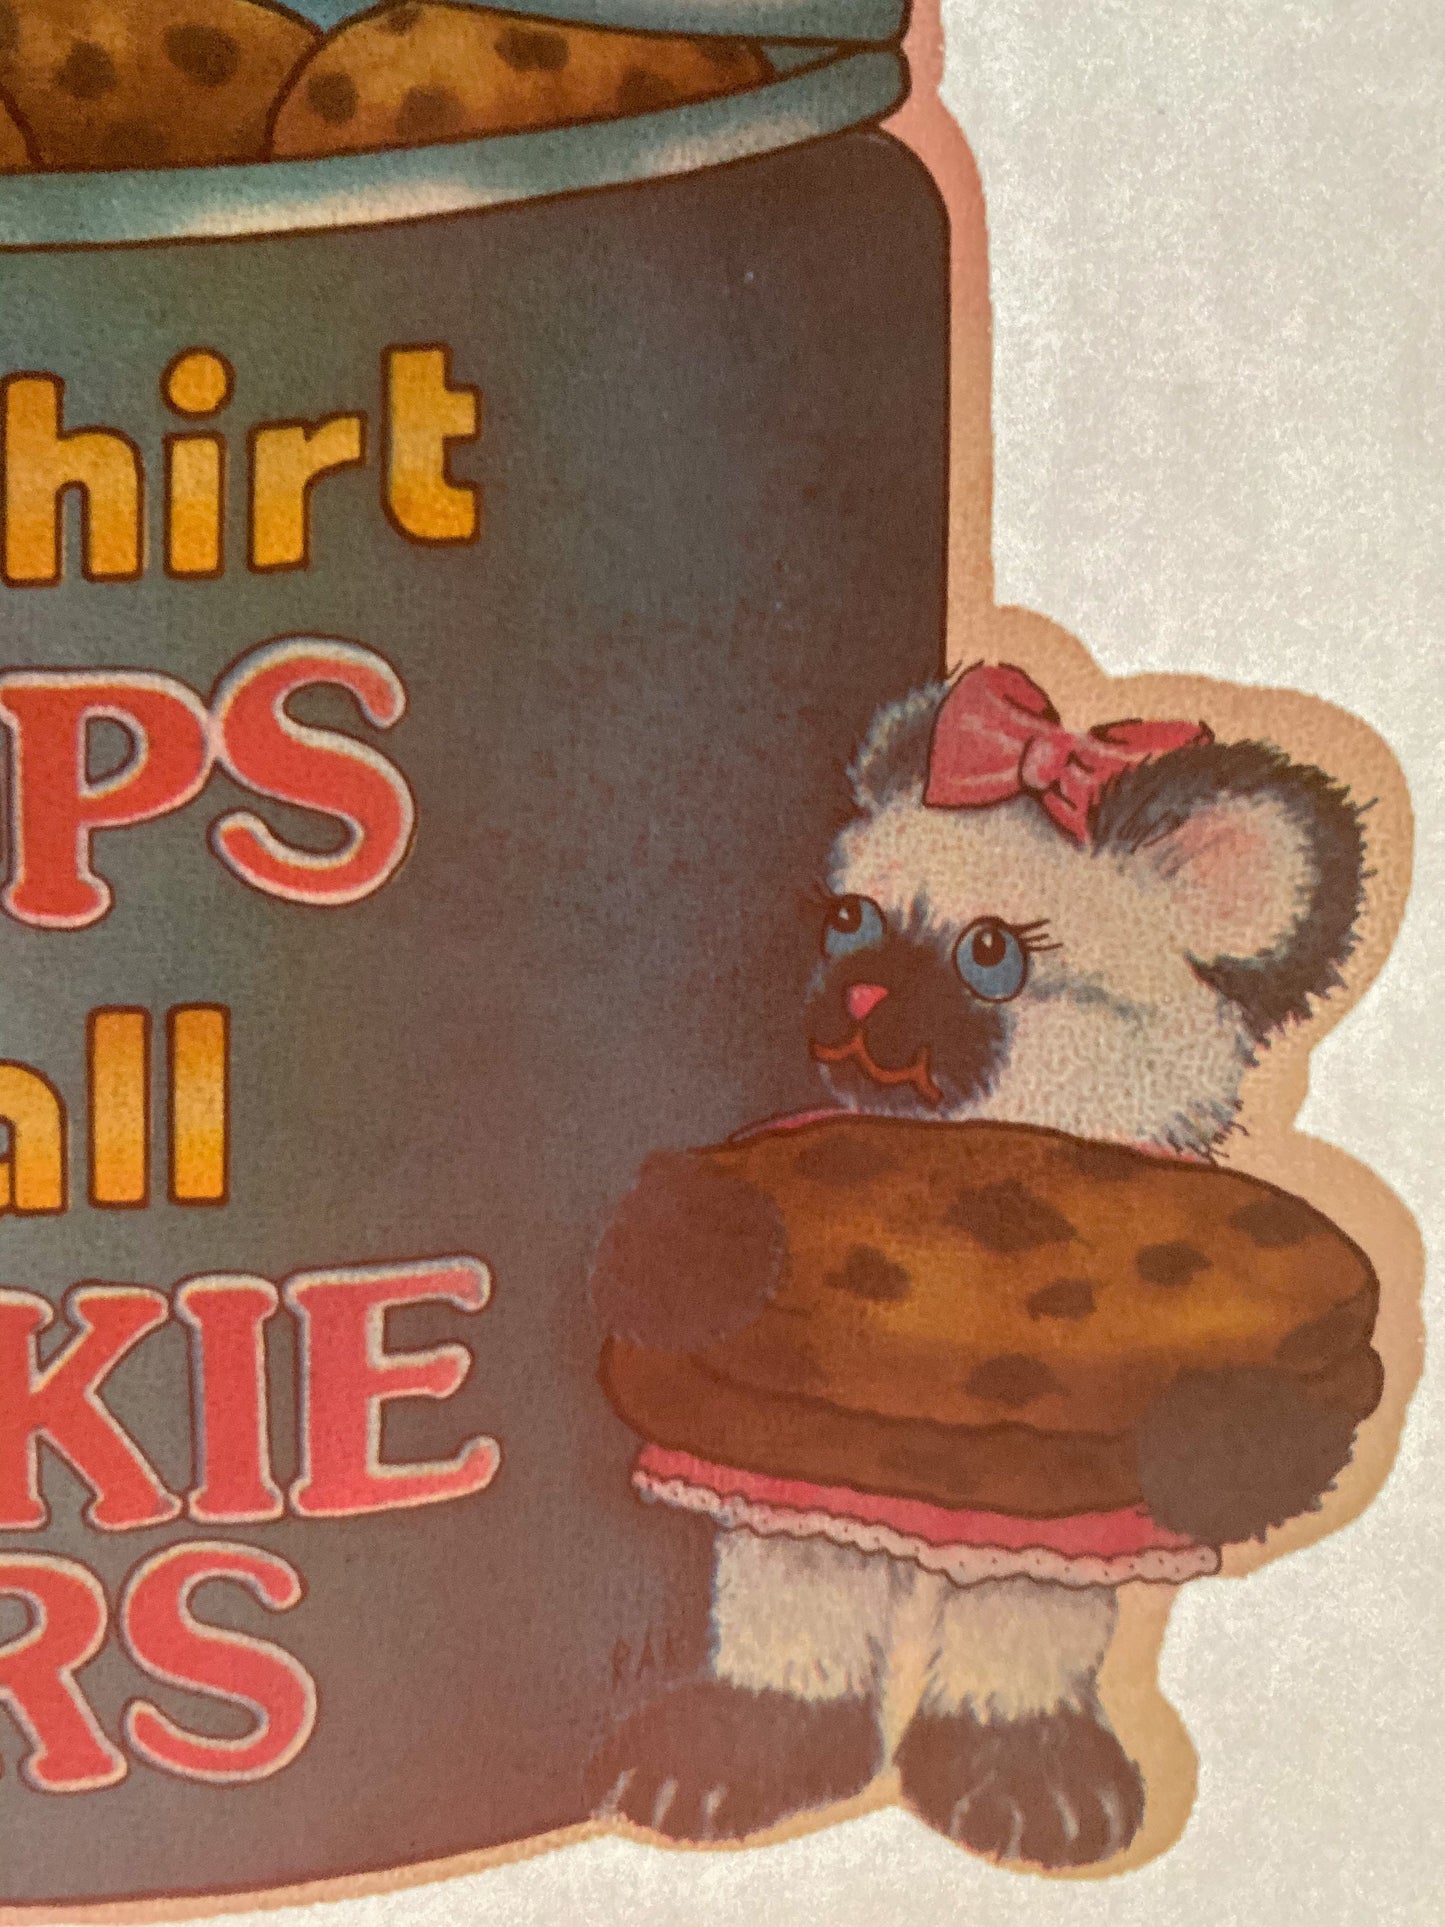 This Shirt Stops at All Cookie Jars Vintage Iron On Heat Transfer